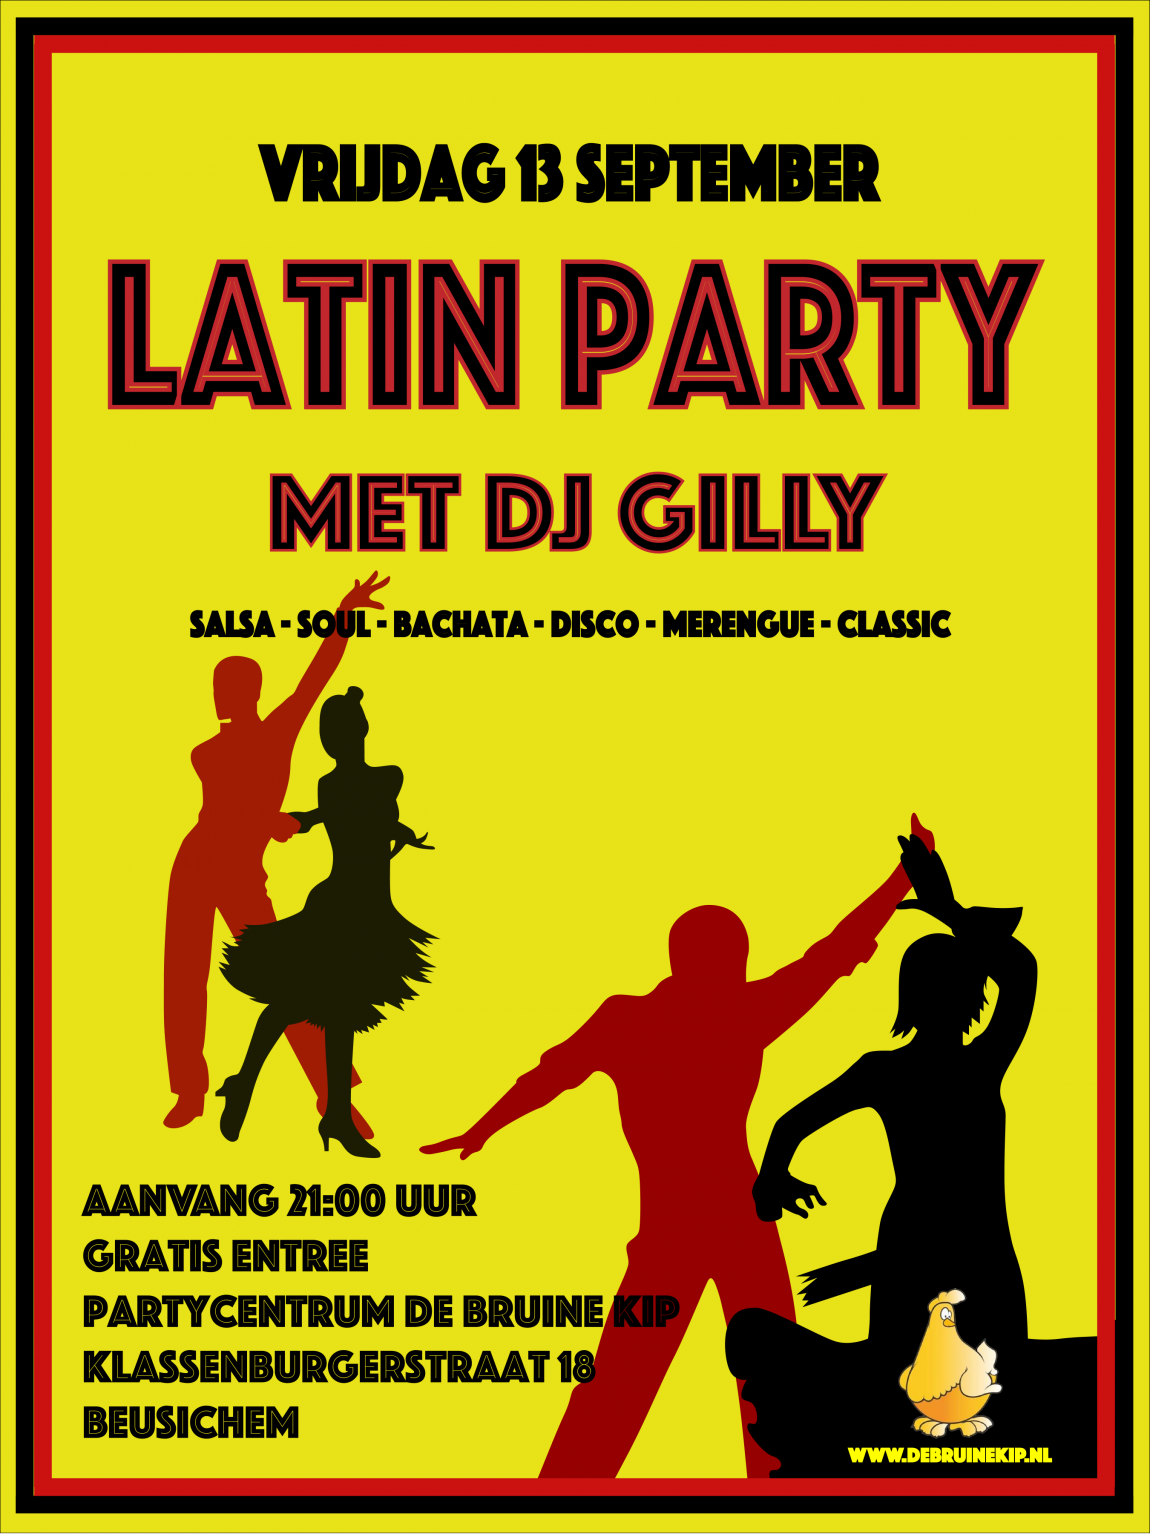 Latin-Party-1309.png